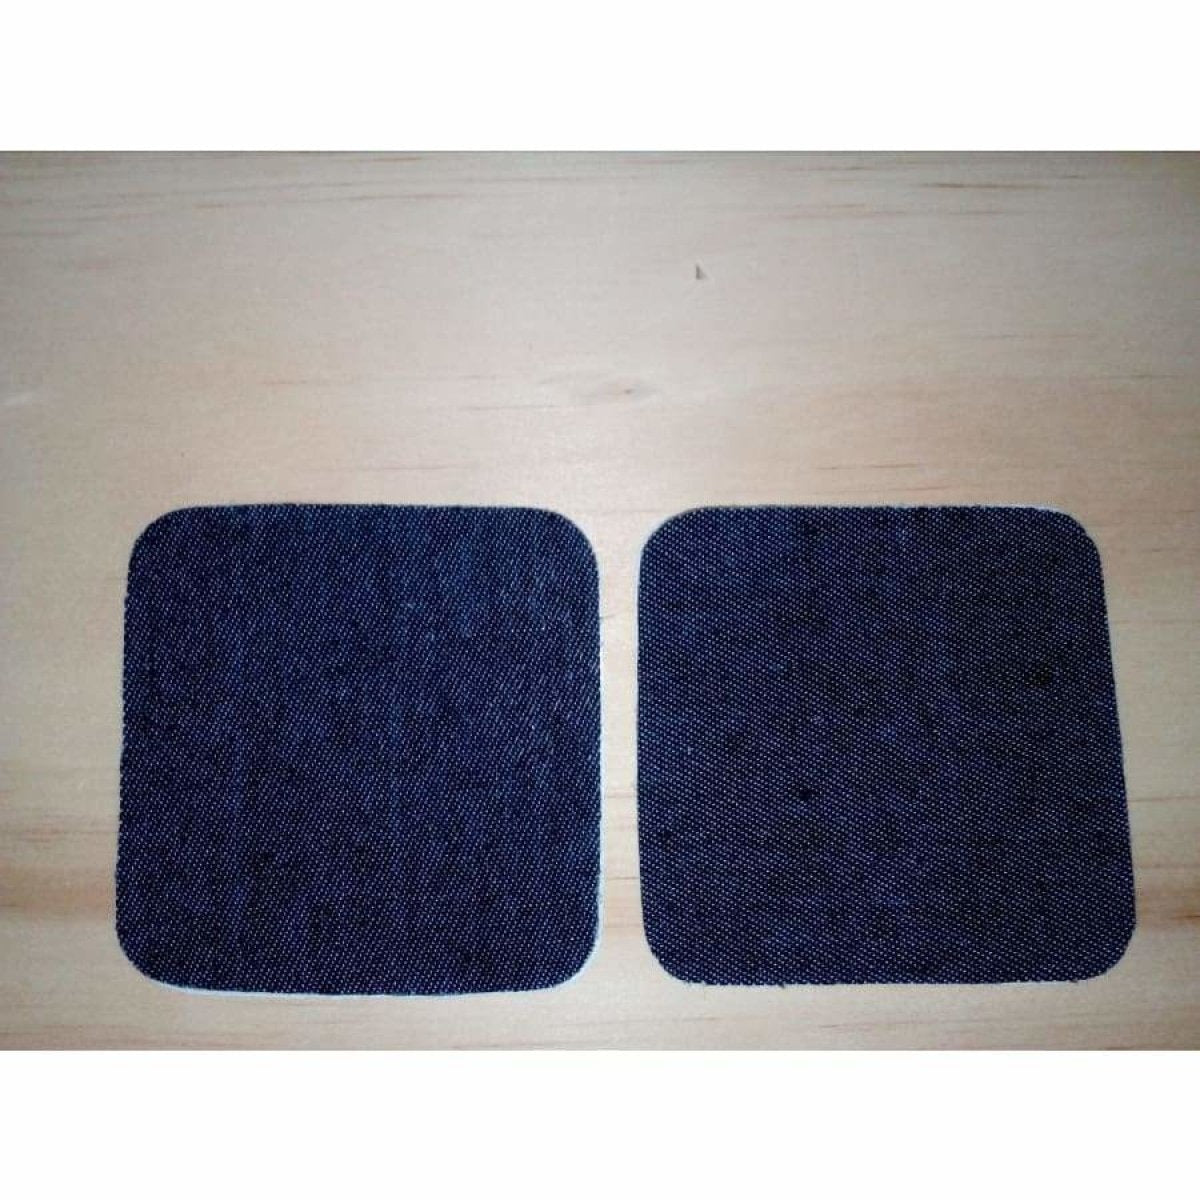 2pcs Iron-on Fabric Blue Black Denim Jeans Clothing Jacket Patch Patches Repair Sewing Shapes - 7.5x7.5cm Black - - Asia Sell